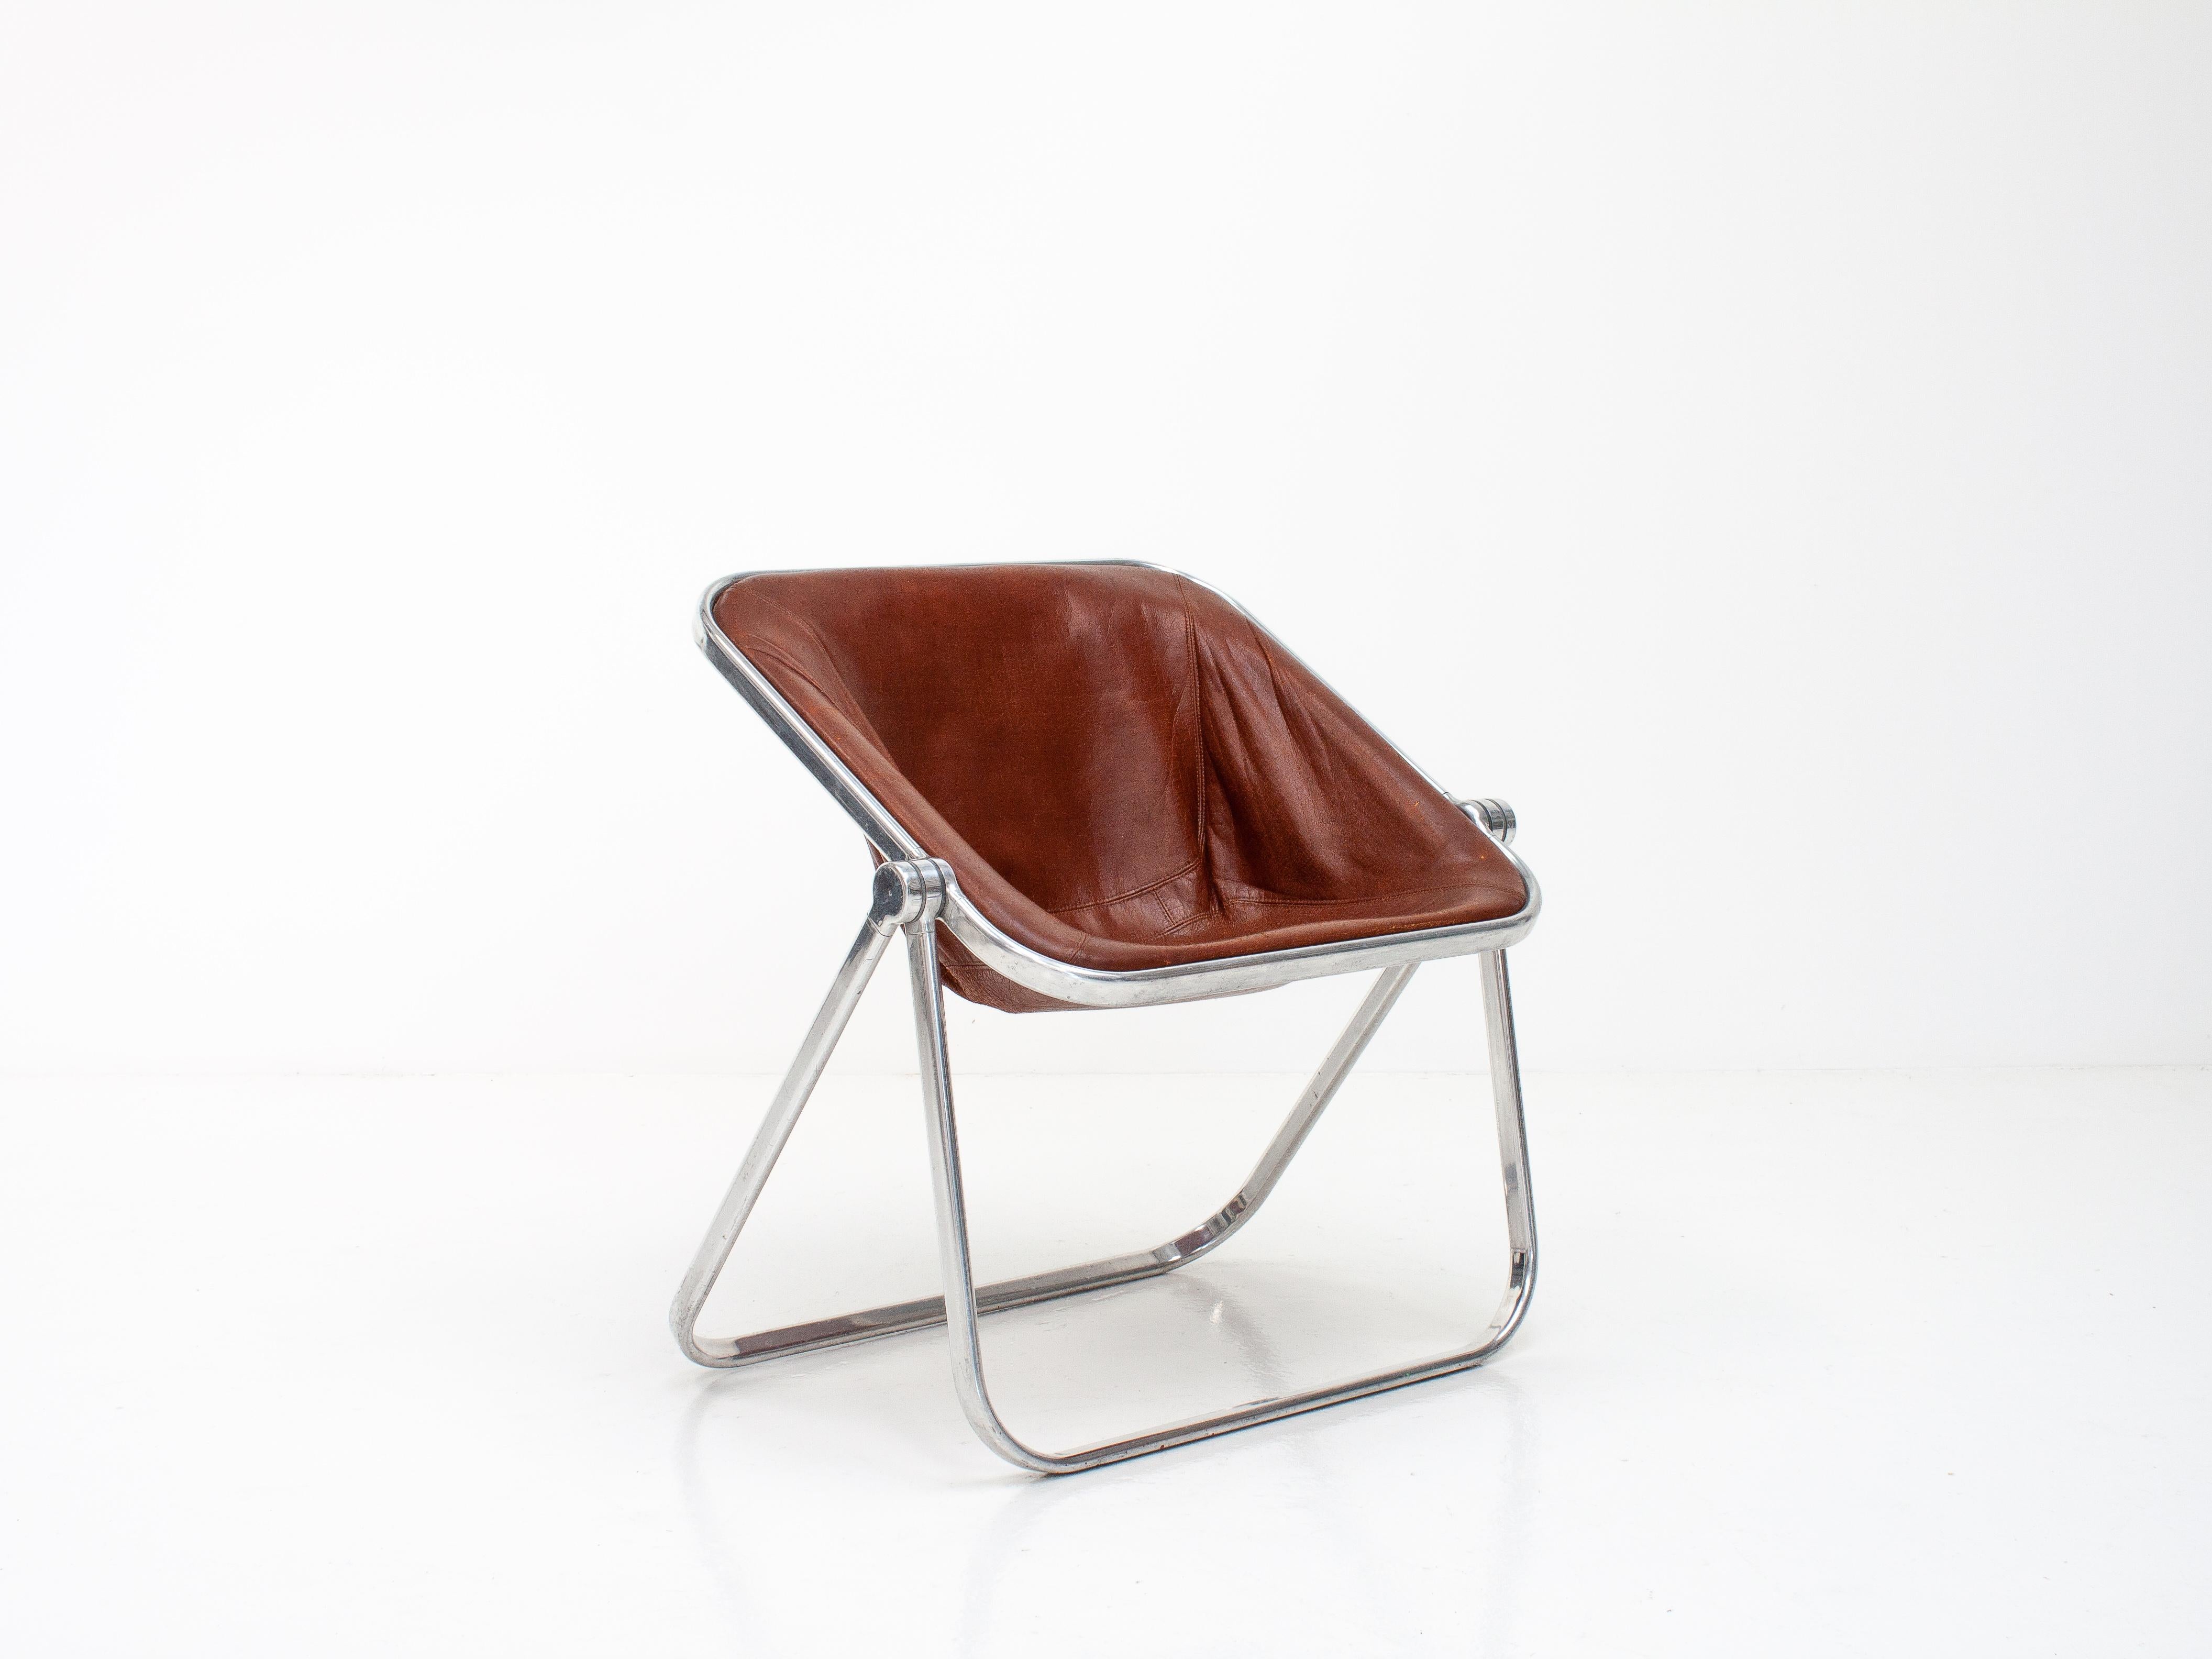 Plona Folding Lounge Chair by Giancarlo Piretti for Castelli in 1969, Italy 1